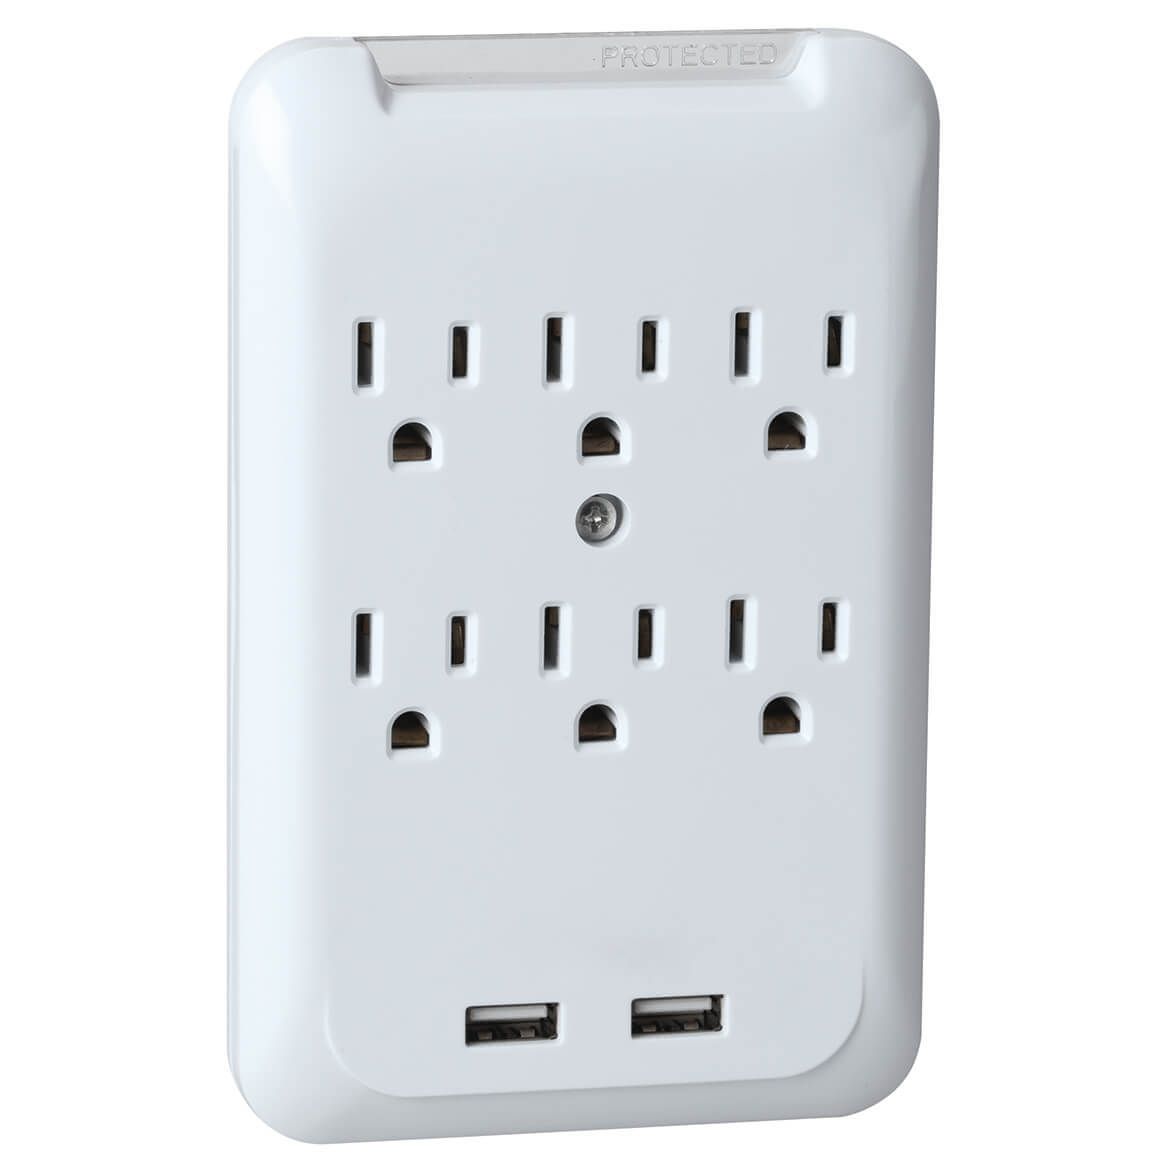 6-Outlet 2-USB Surge Protector Wall Tap + '-' + 370713